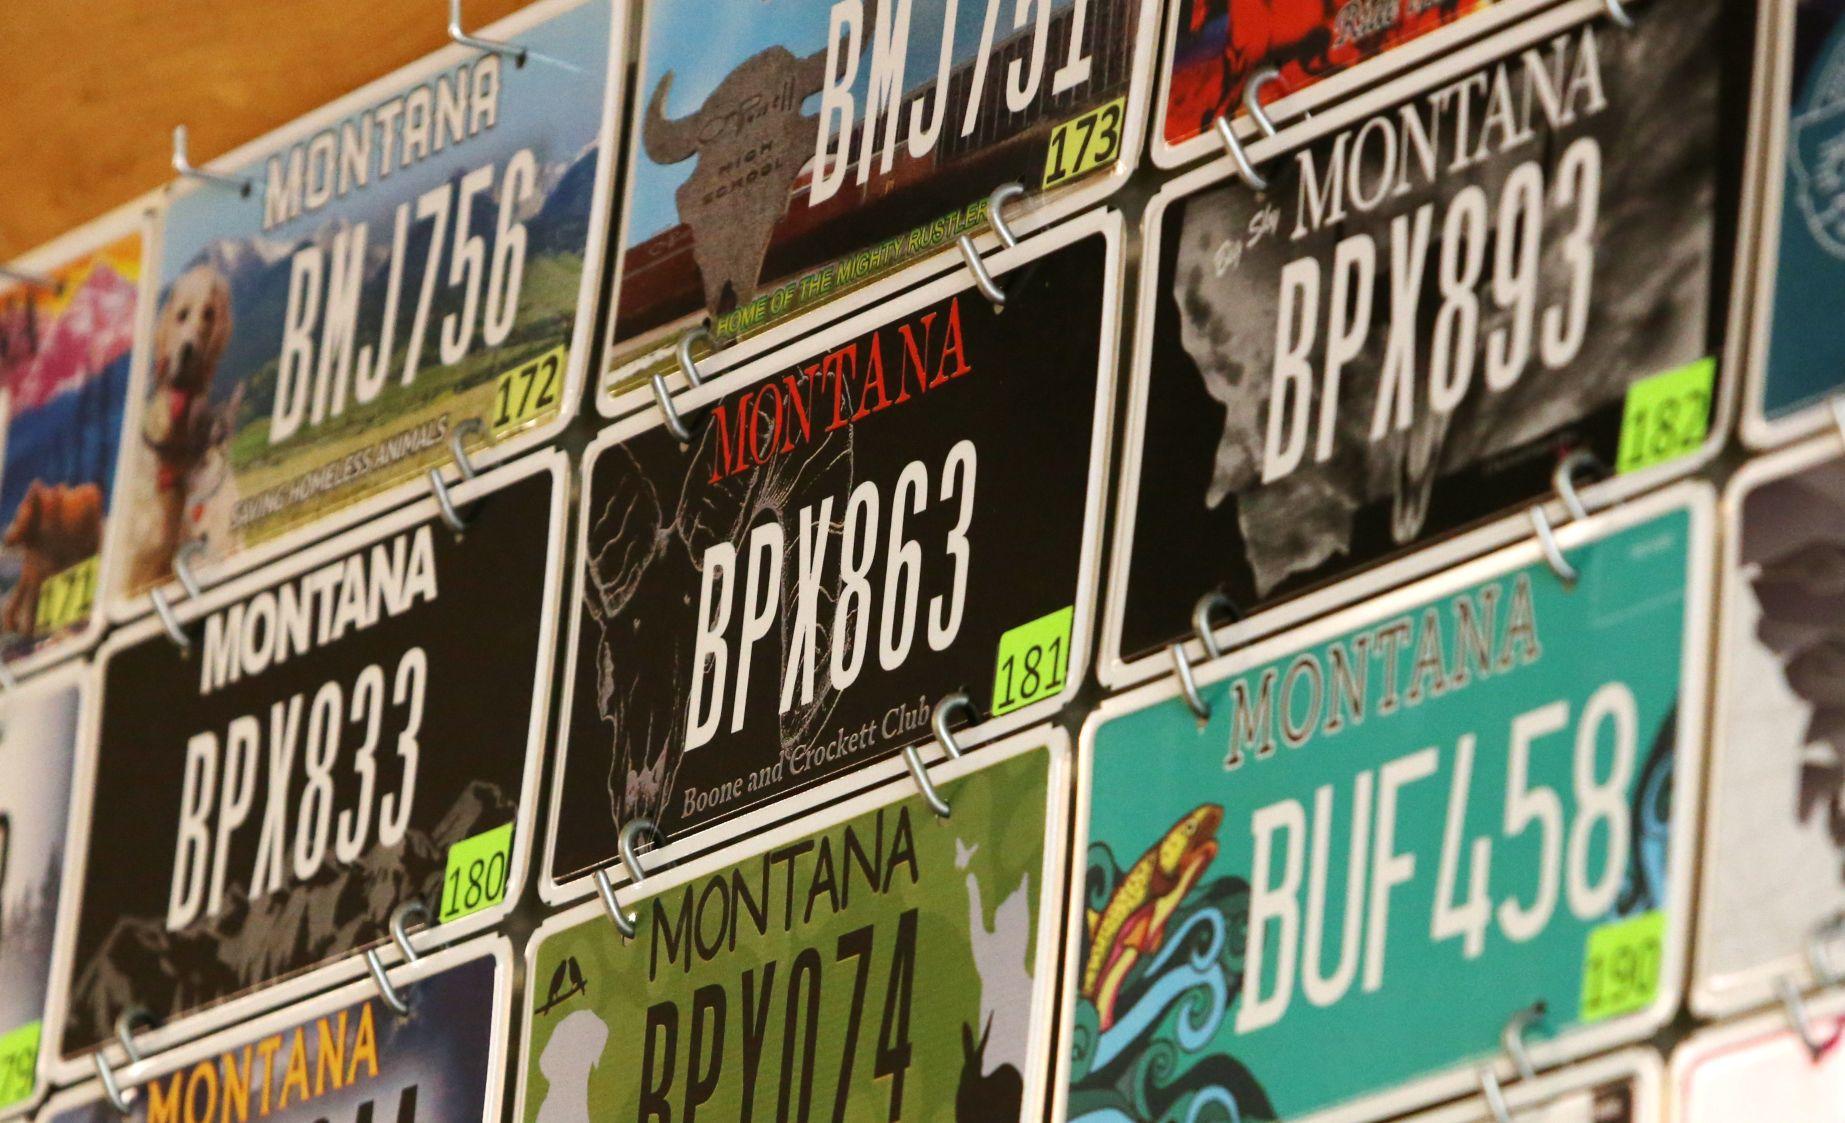 New law seeks to reduce Montana's license plate designs State